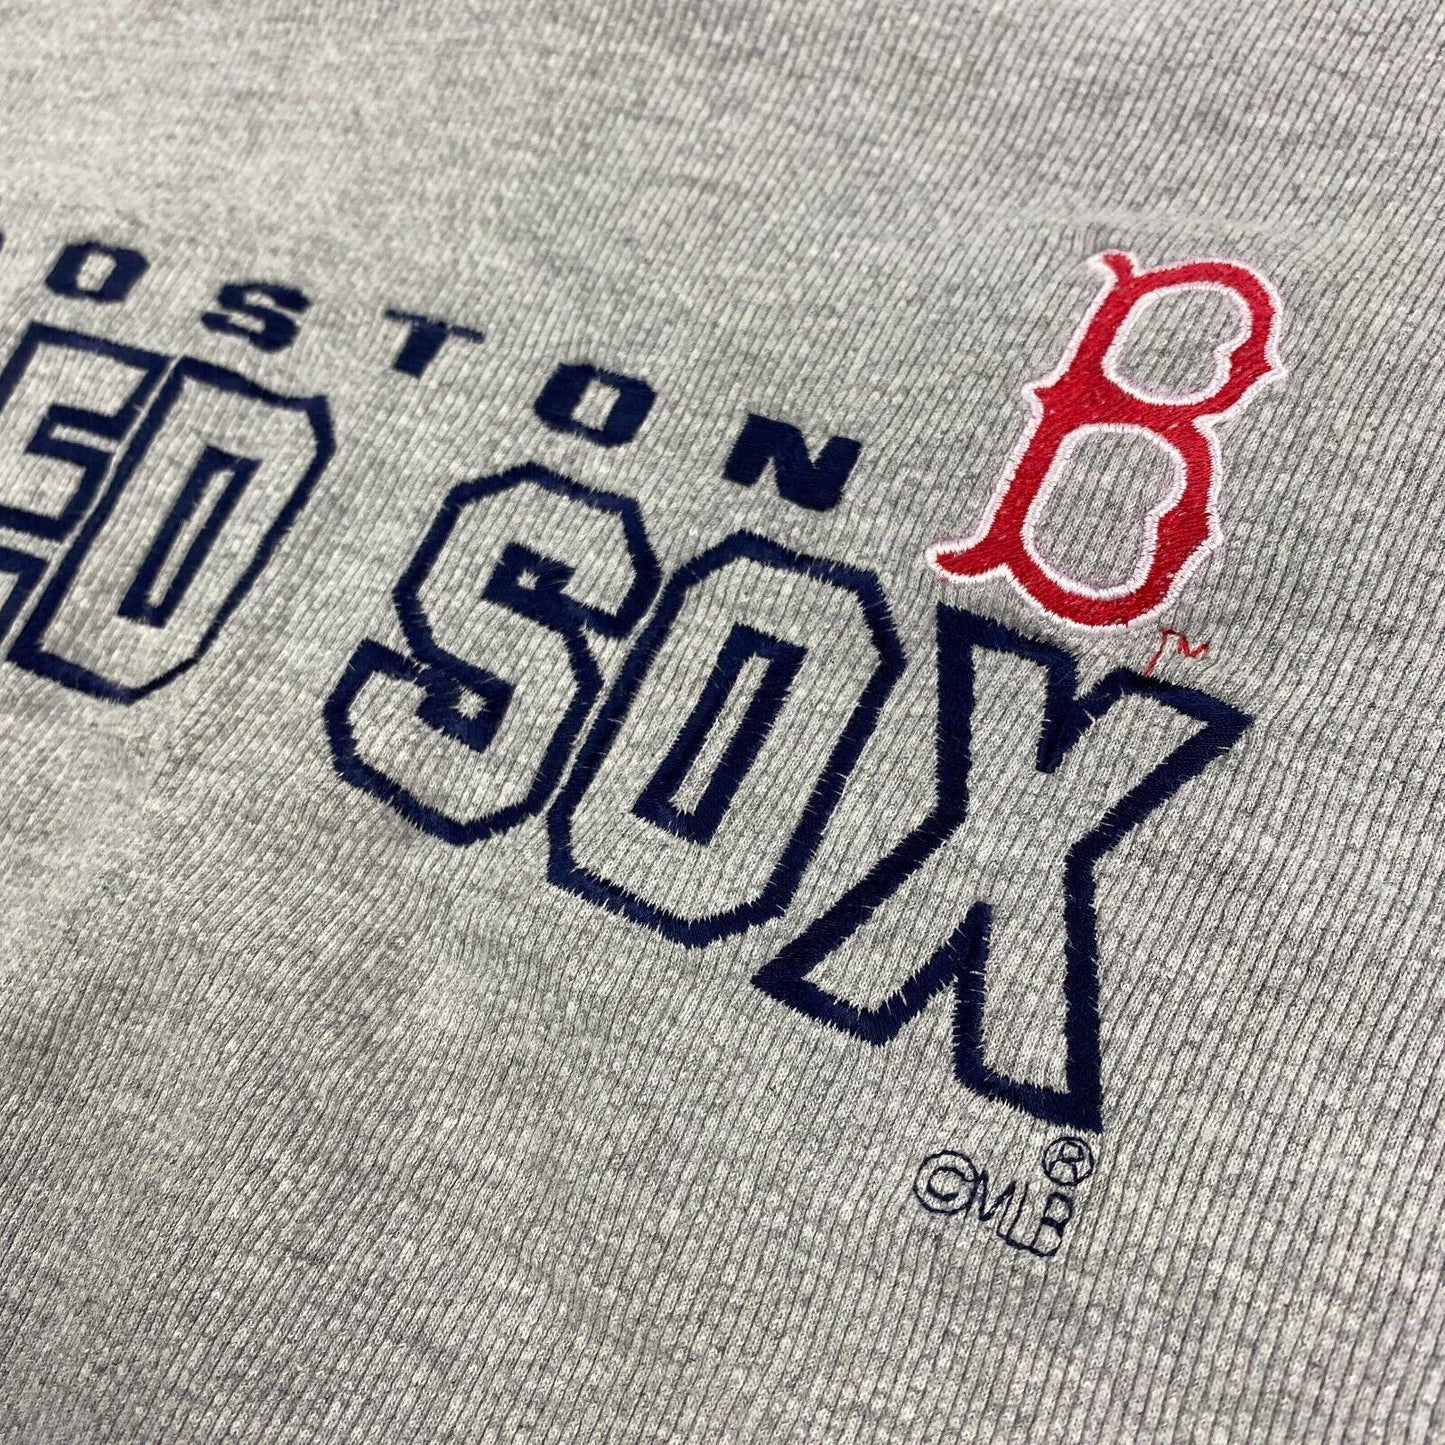 VINTAGE Boston Red Sox Embroidered MLB T-Shirt sz L Youth